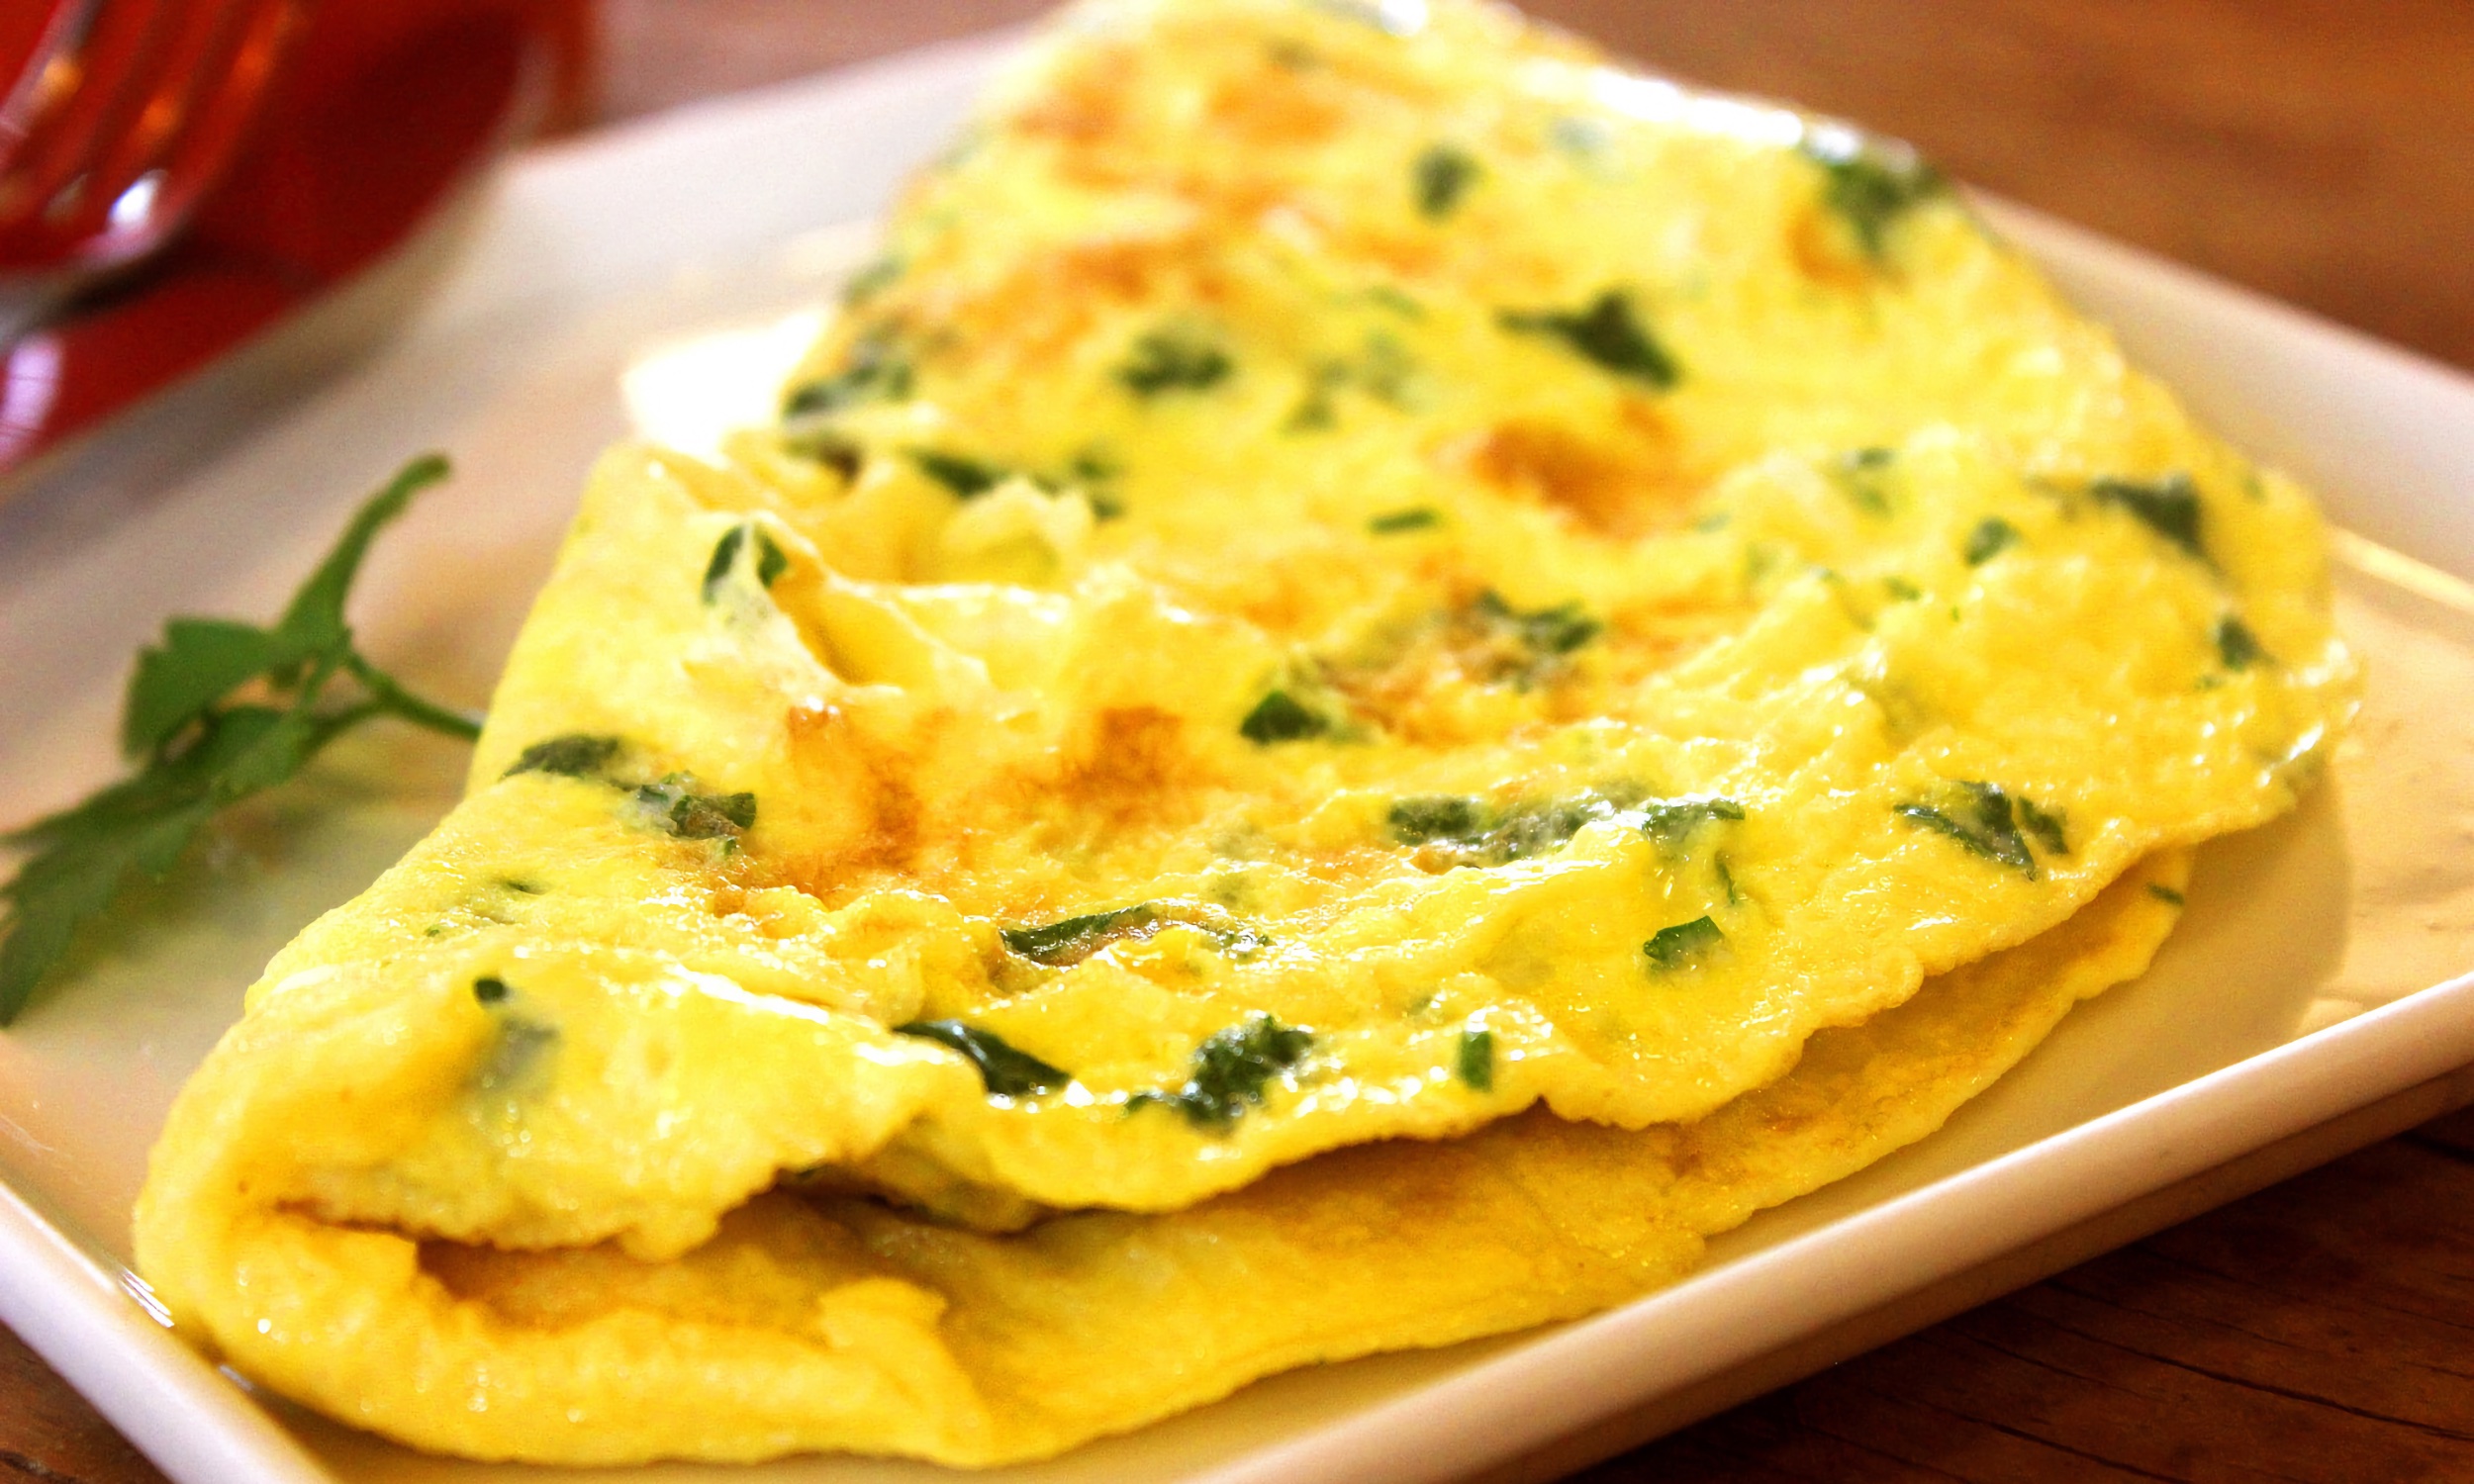 An omelet presented on a dish